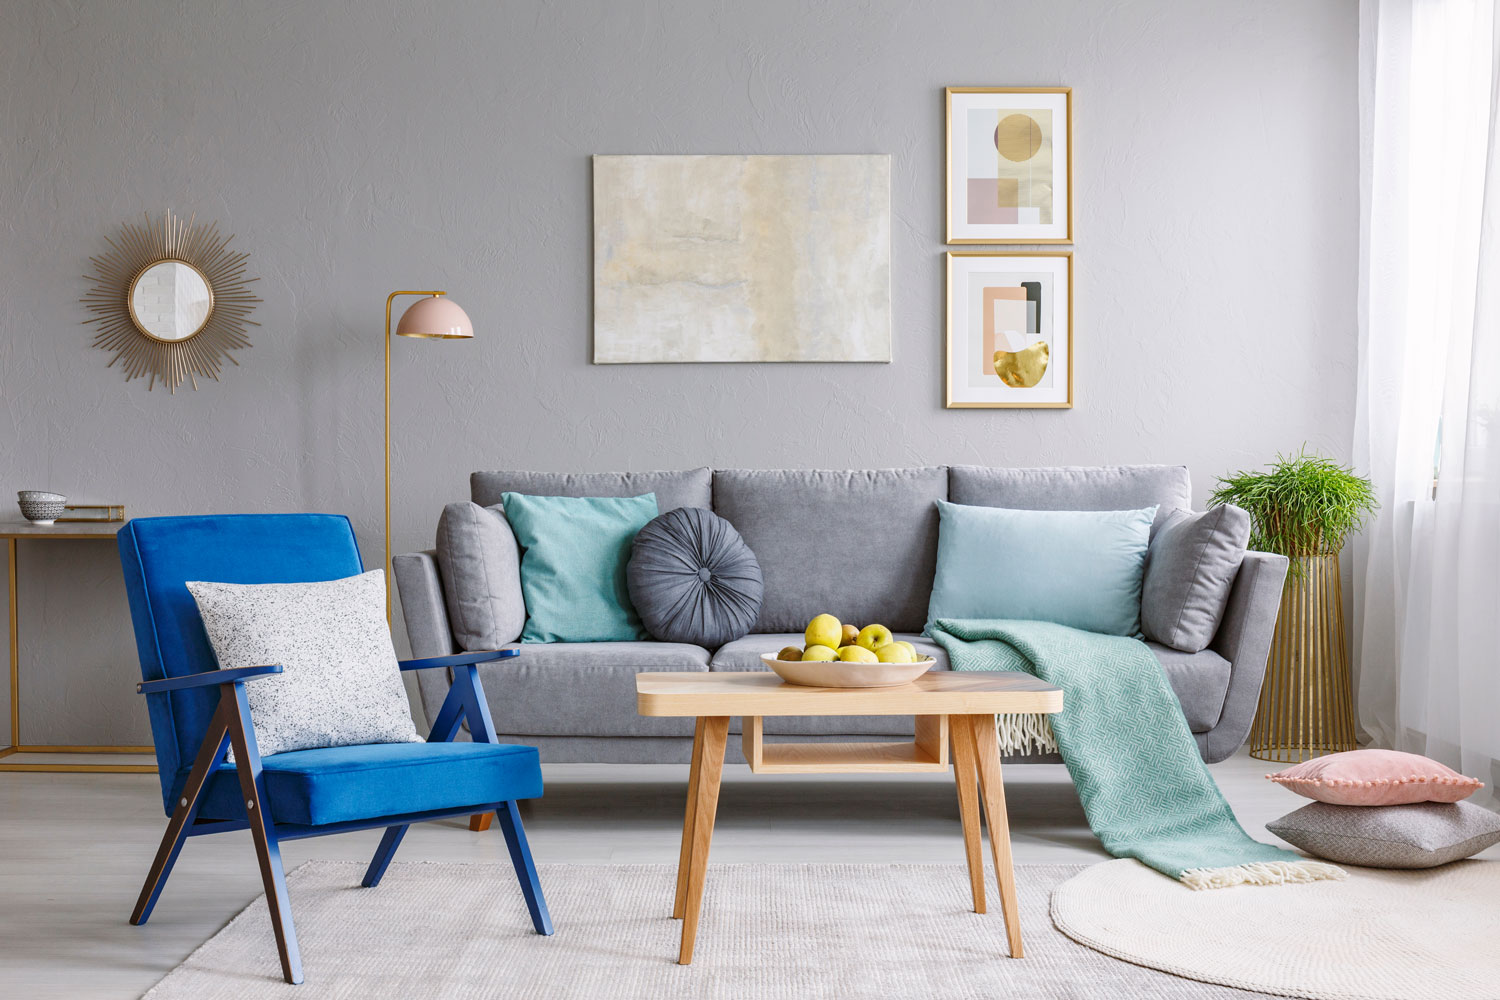 Gray living room wall with gray sofa and bright pillows